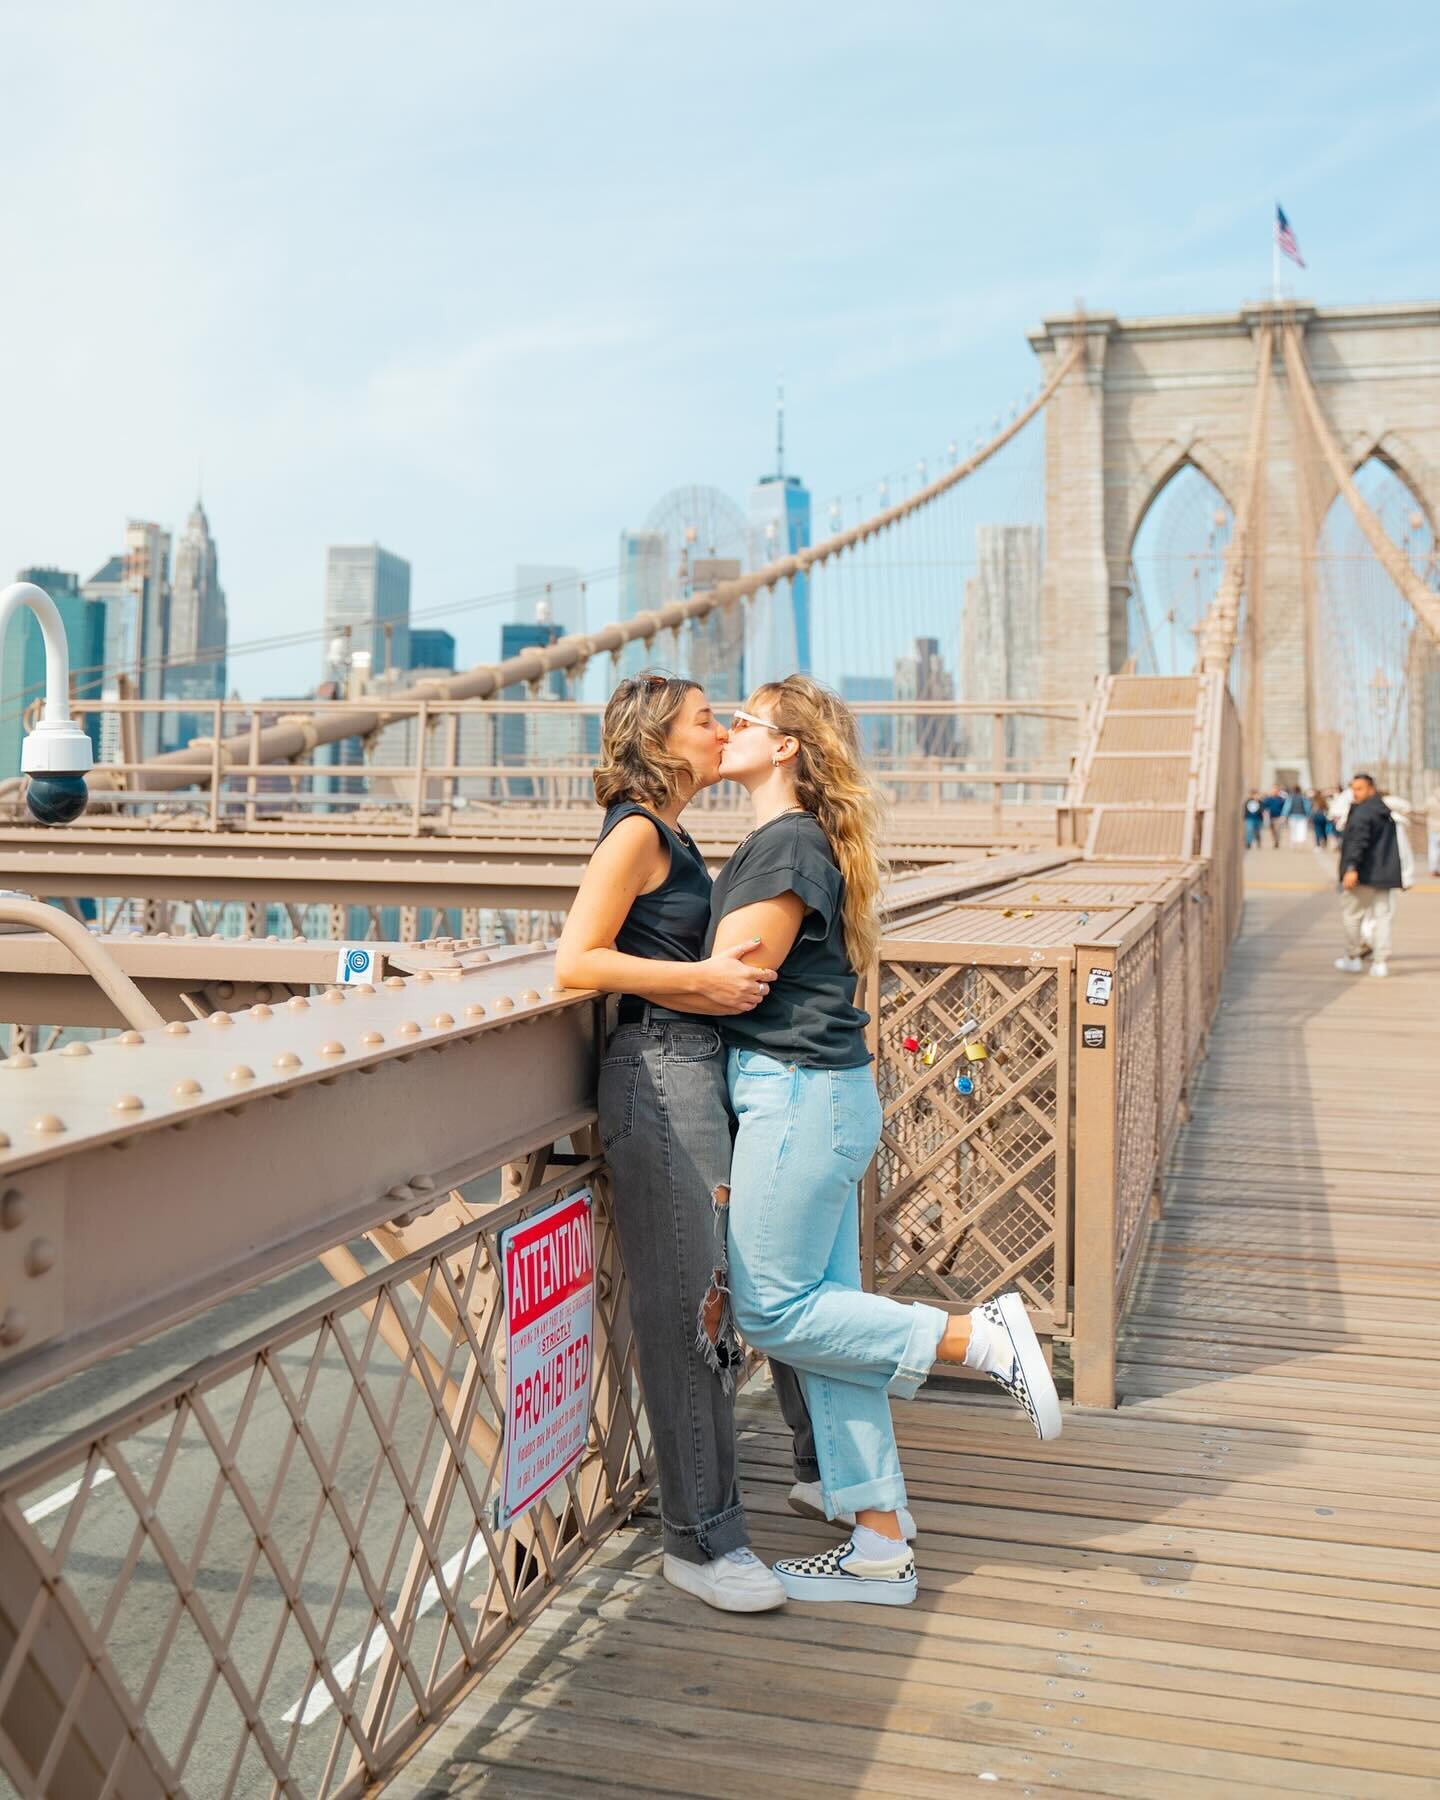 Spread love it&rsquo;s the Brooklyn way 🏳️&zwj;🌈

📸 : photo assist @thejennaway 

#brooklynbridge #brooklynbred #travelcouple #lesbiancouples #travelcouplelife #queertravel #queernyc #nyinfluencer #lgbtqtravelers #lesbiancouplesofinstagram #lesbia